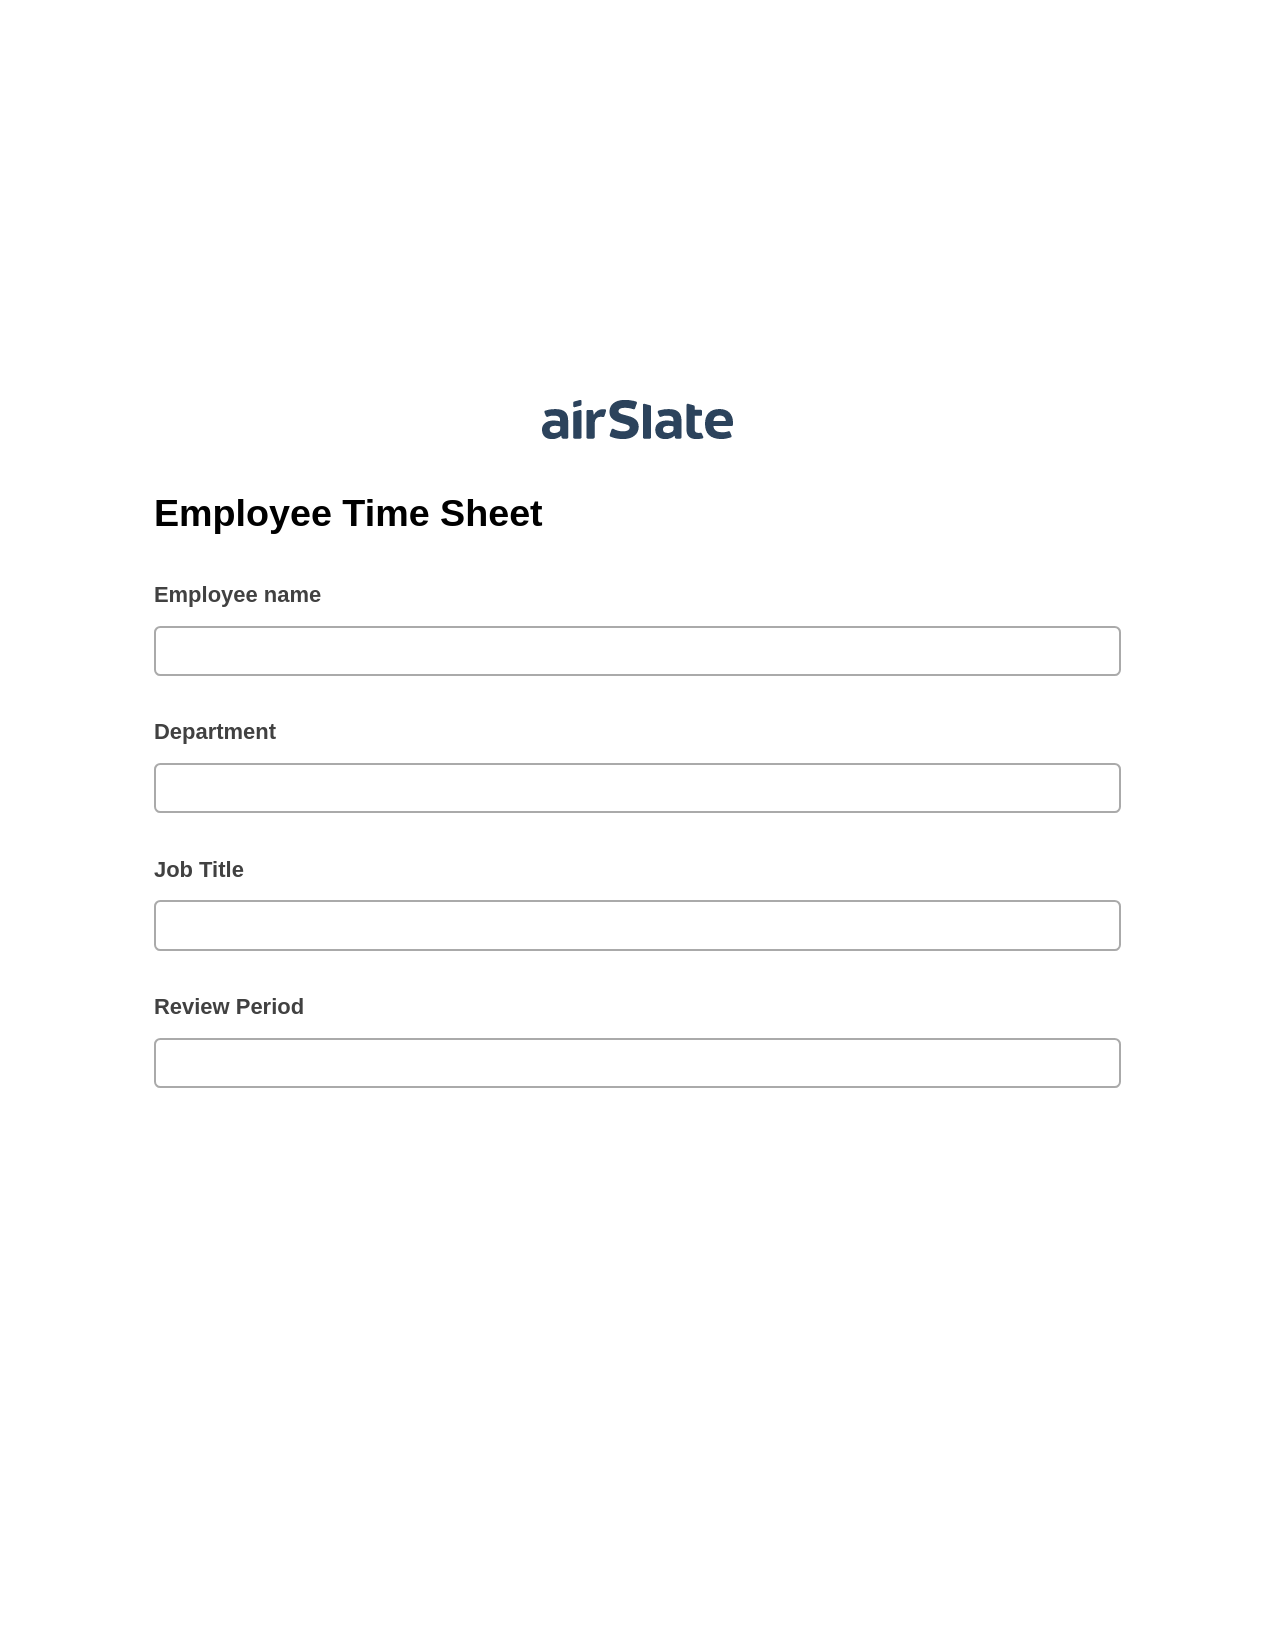 Multirole Employee Time Sheet Pre-fill Dropdowns from Excel Bot, Create slate addon, Export to Salesforce Record Bot